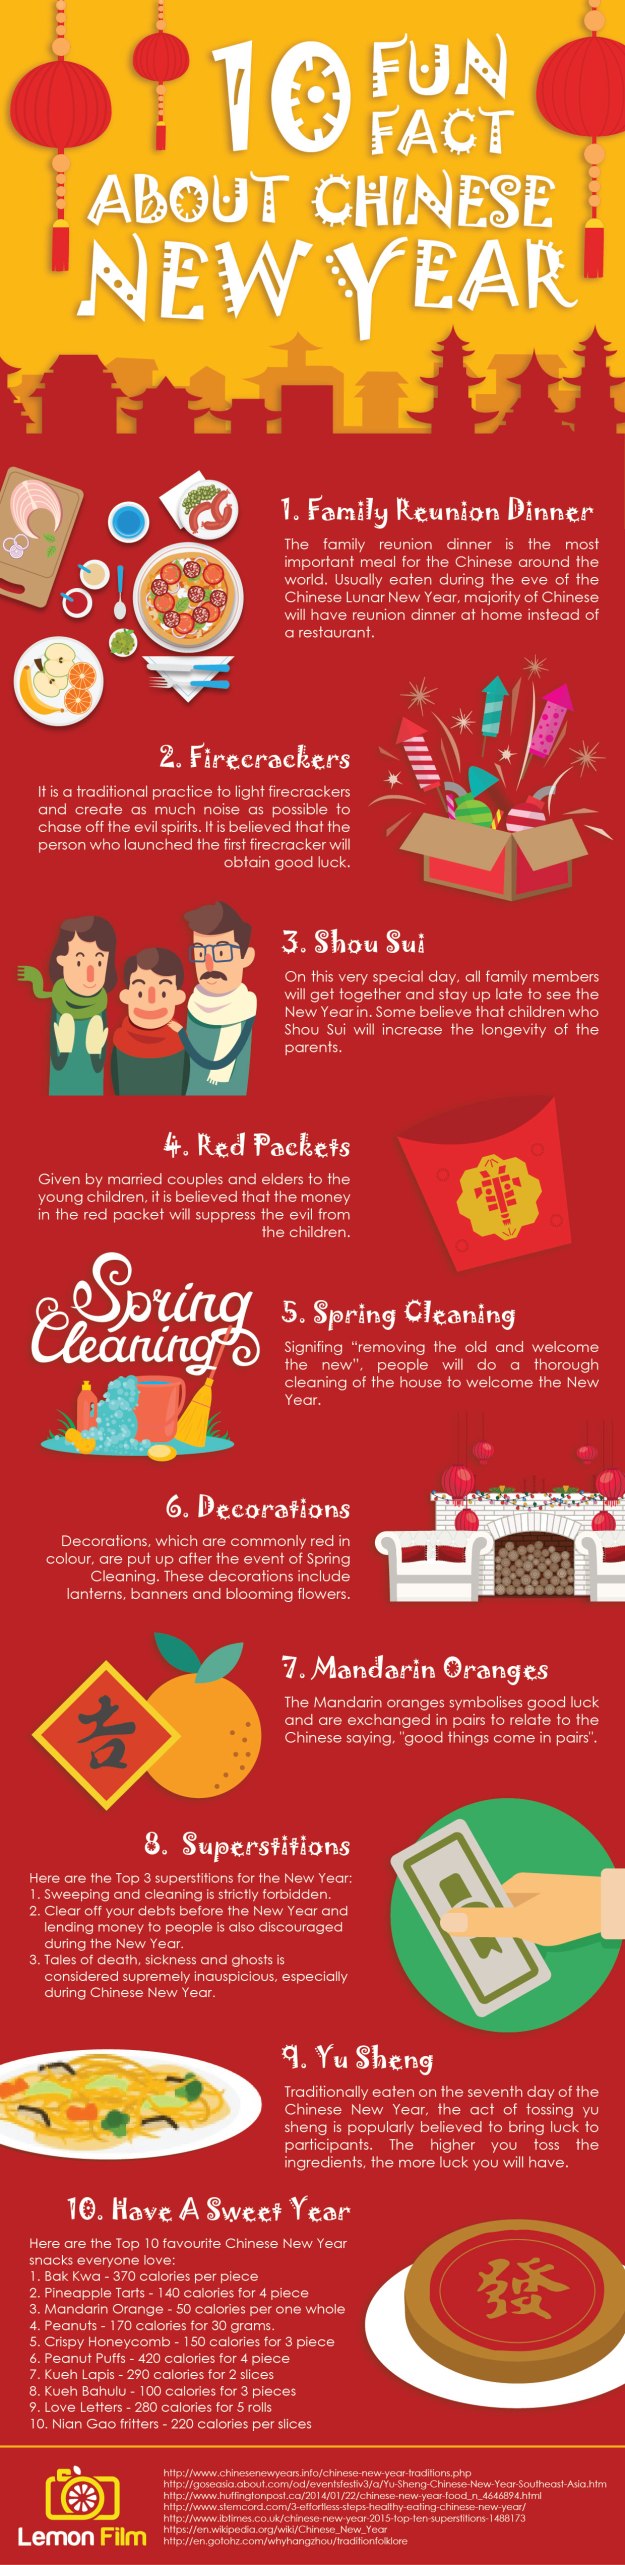 10 Fun Facts About Chinese New Year